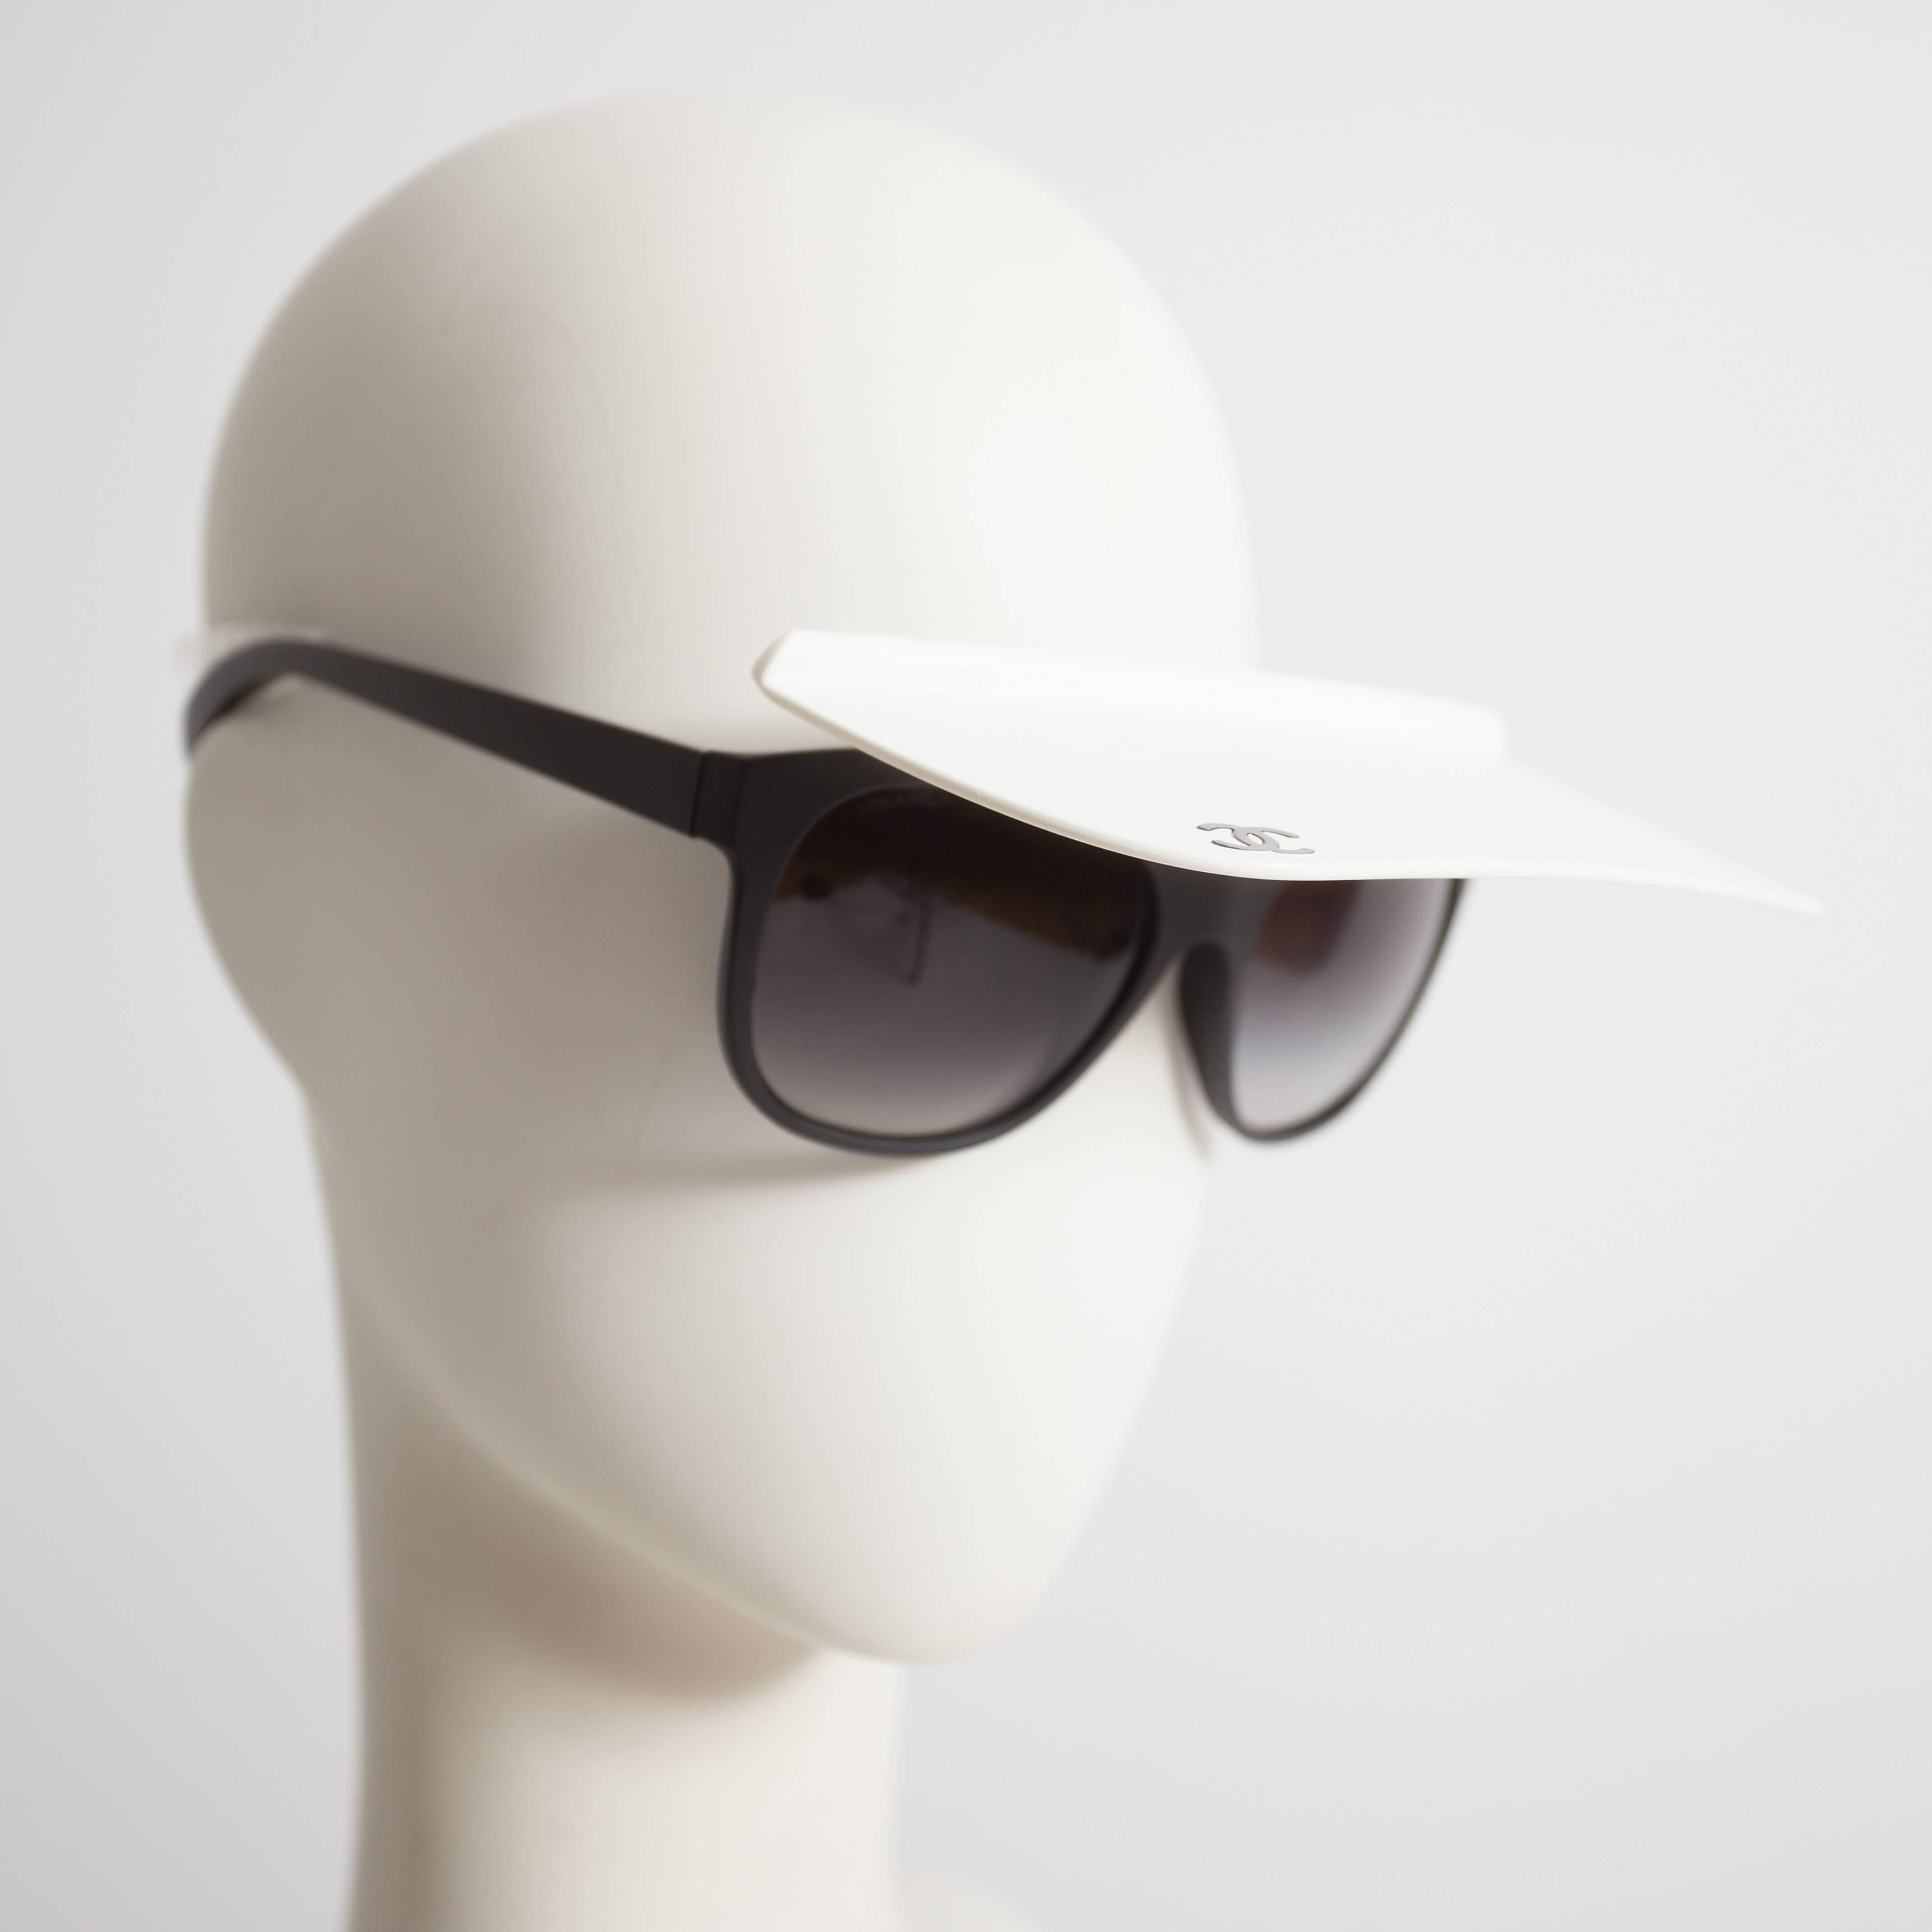 Rare Karl Lagerfeld for Chanel visor sunglasses, spring-summer 2014. Feature attached white visor with 'CC' logo and original case.